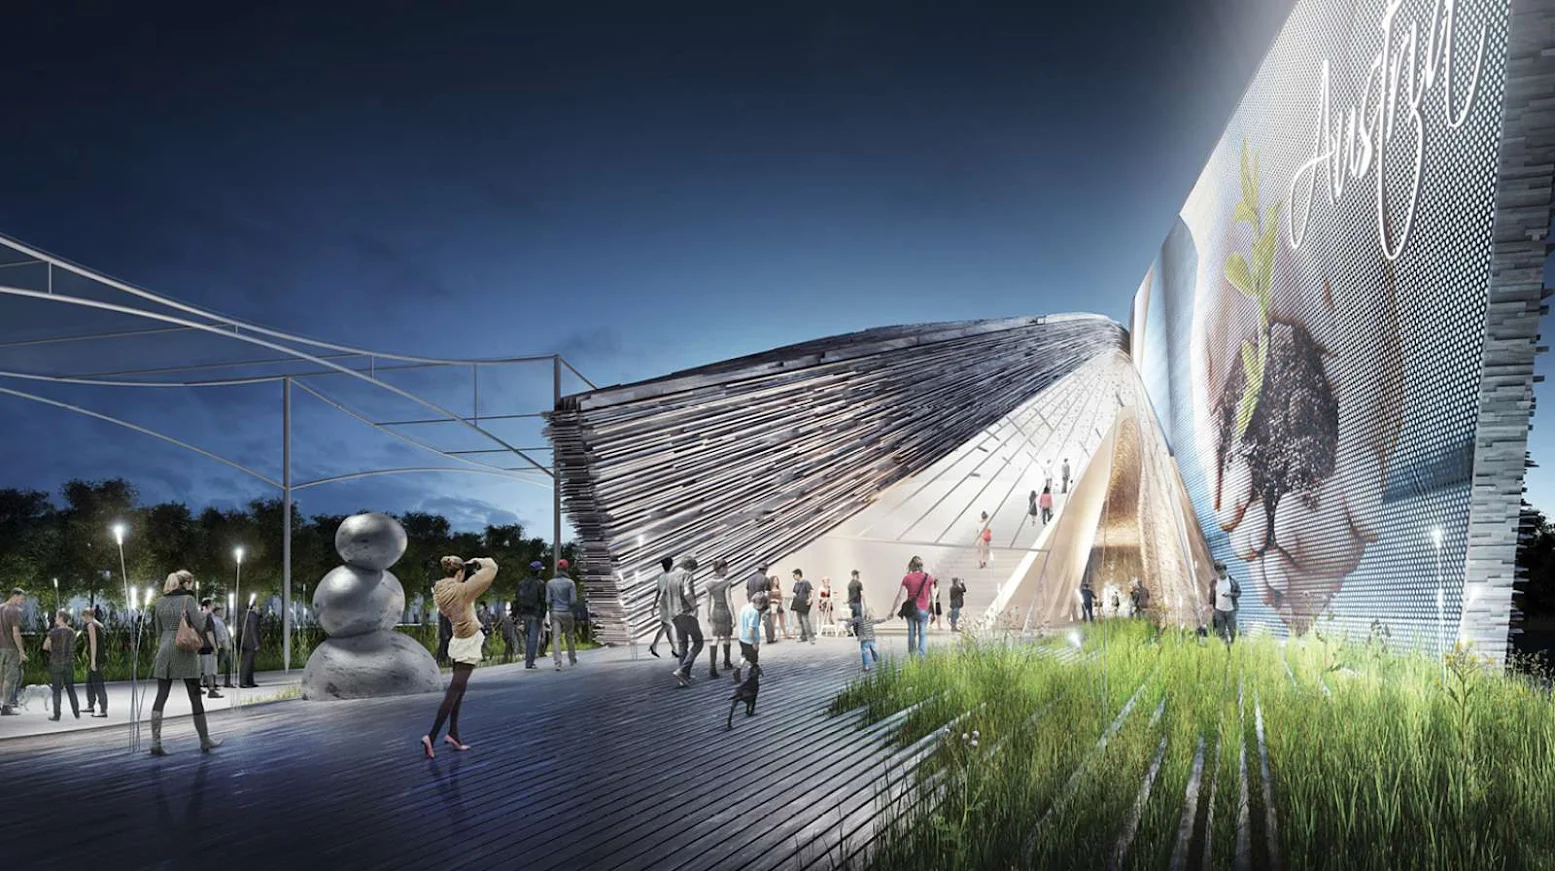 Austrian Pavilion Expo 2015 by Bence Pap and